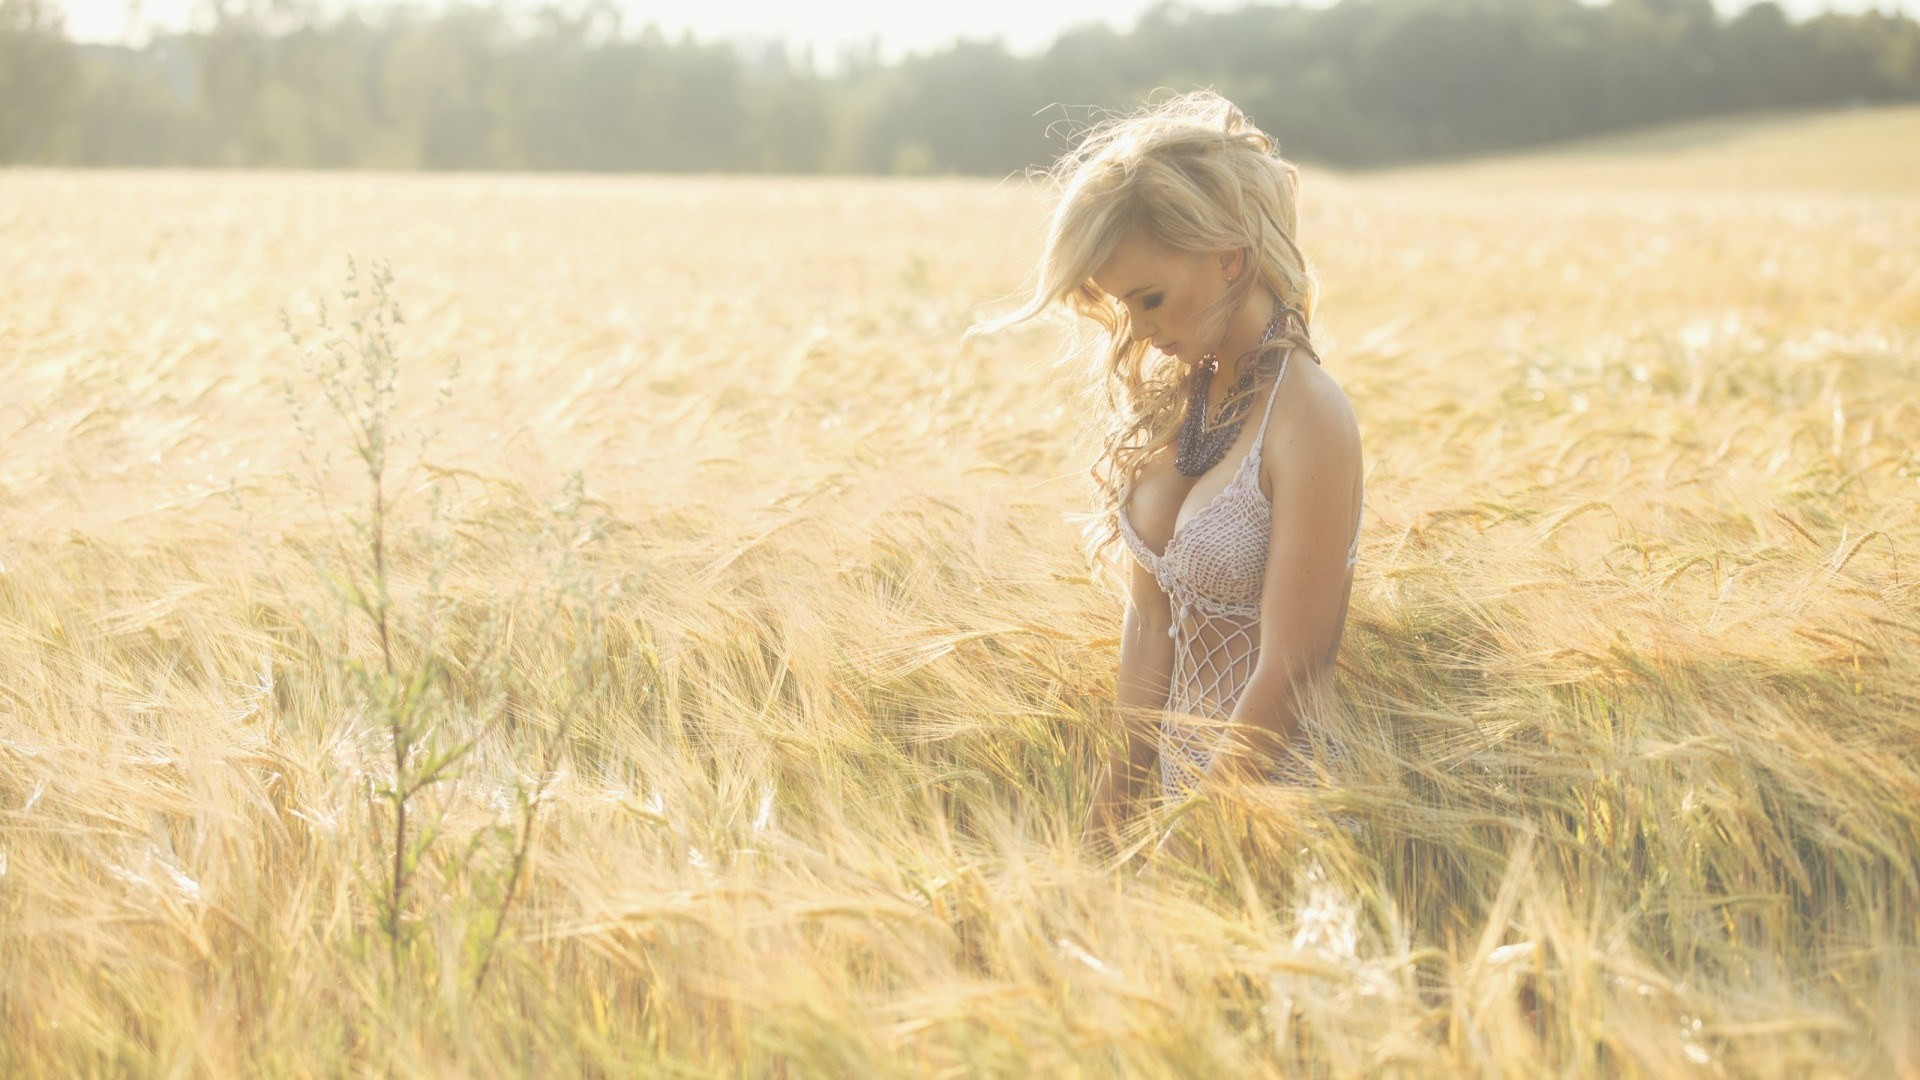 People 1920x1080 women model blonde long hair women outdoors closed eyes field white dress cleavage necklace grain spikelets windy nature hazy outdoors plants boobs